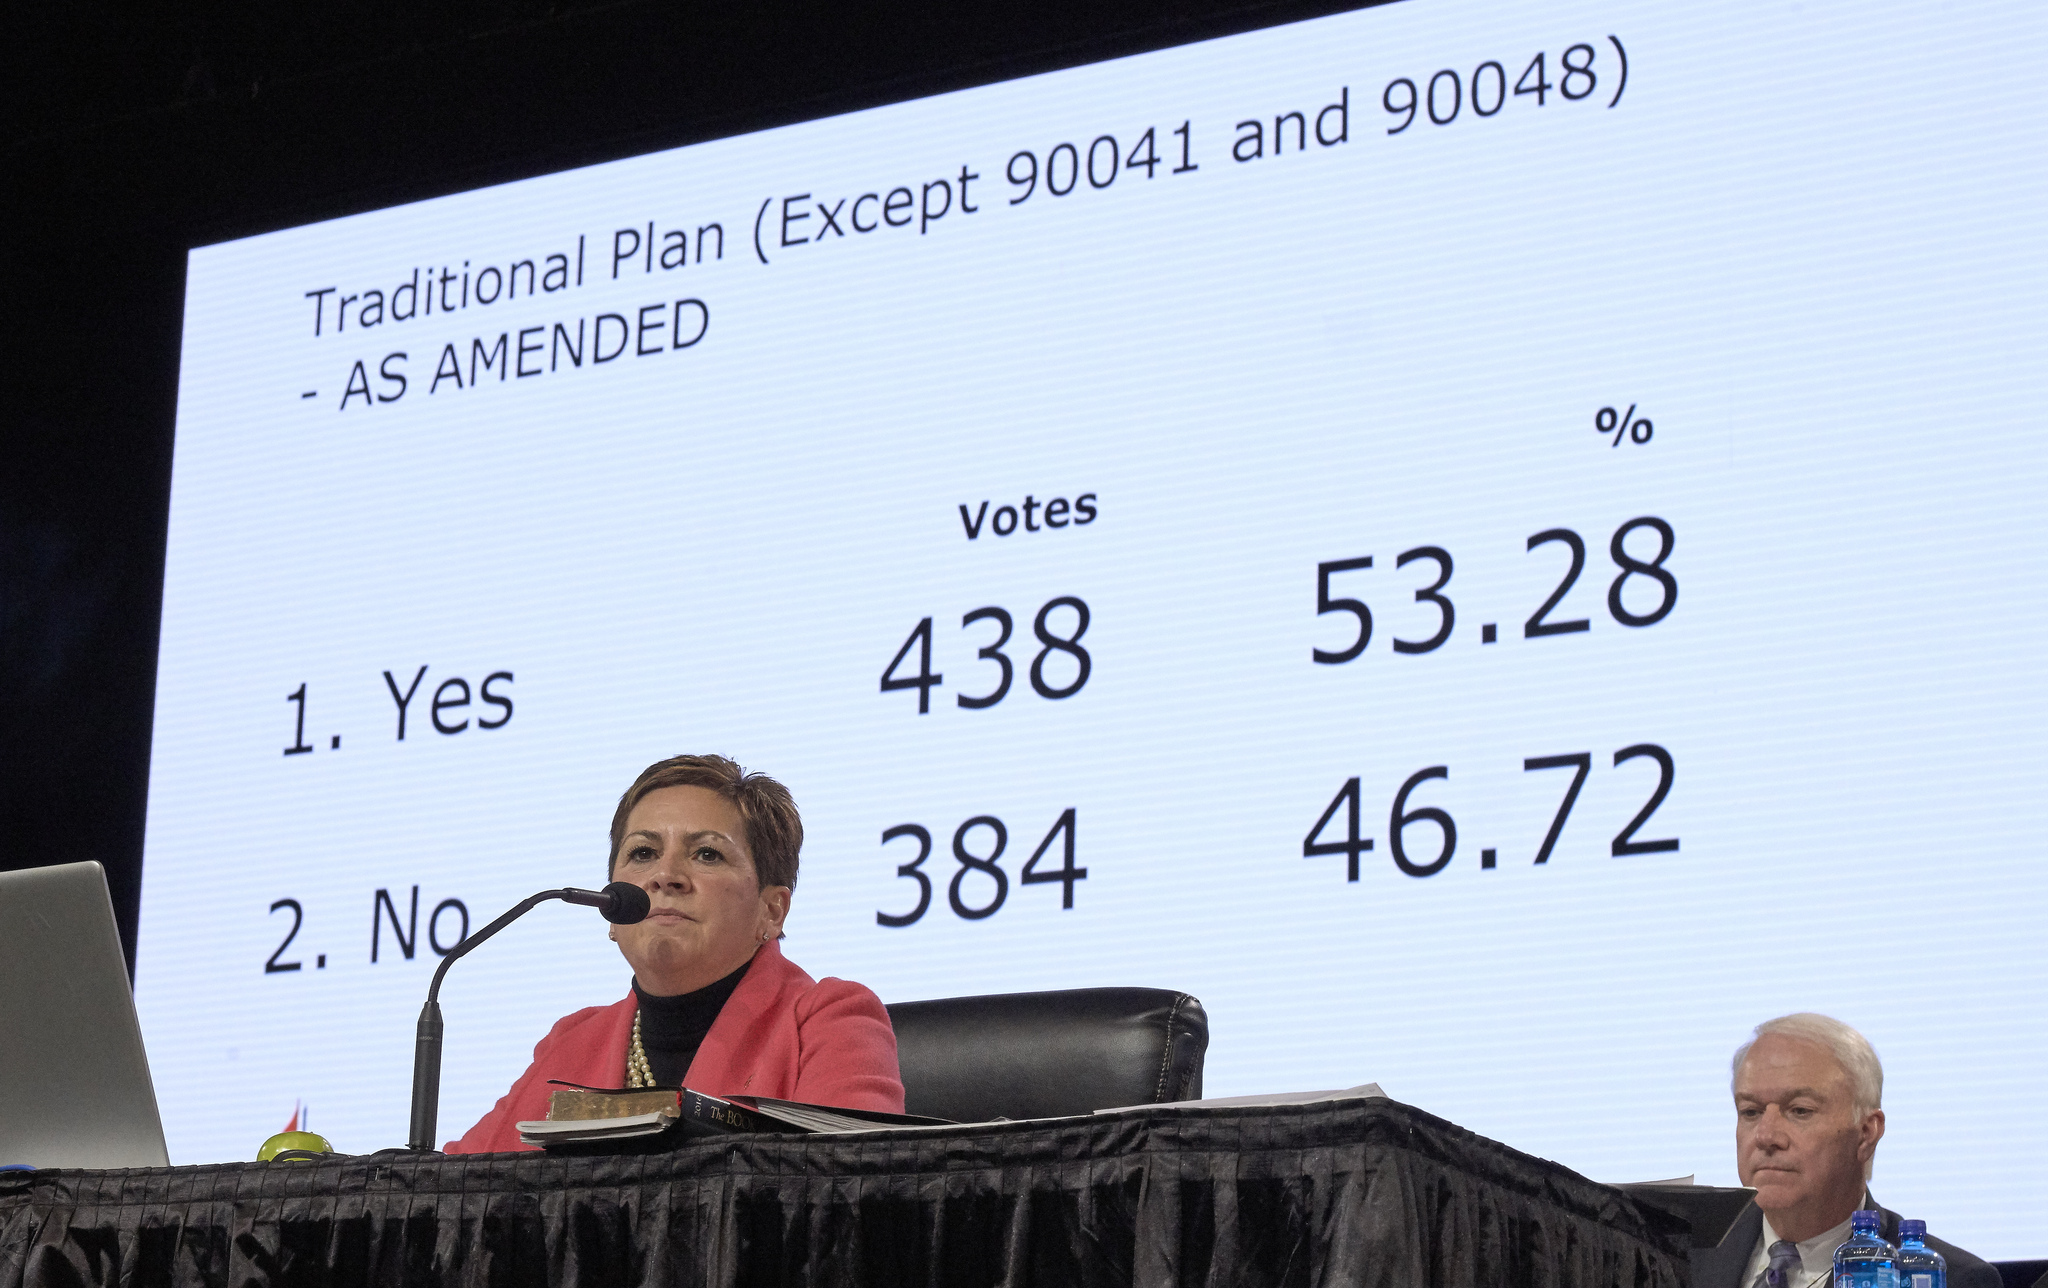 Bishop Cynthia Fierro Harvey observes the results from a Feb. 26 vote for the Traditional Plan, which affirms the church’s current bans on ordaining LGBTQ clergy and officiating at or hosting same-sex weddings. Photo by Paul Jeffrey, UMNS.